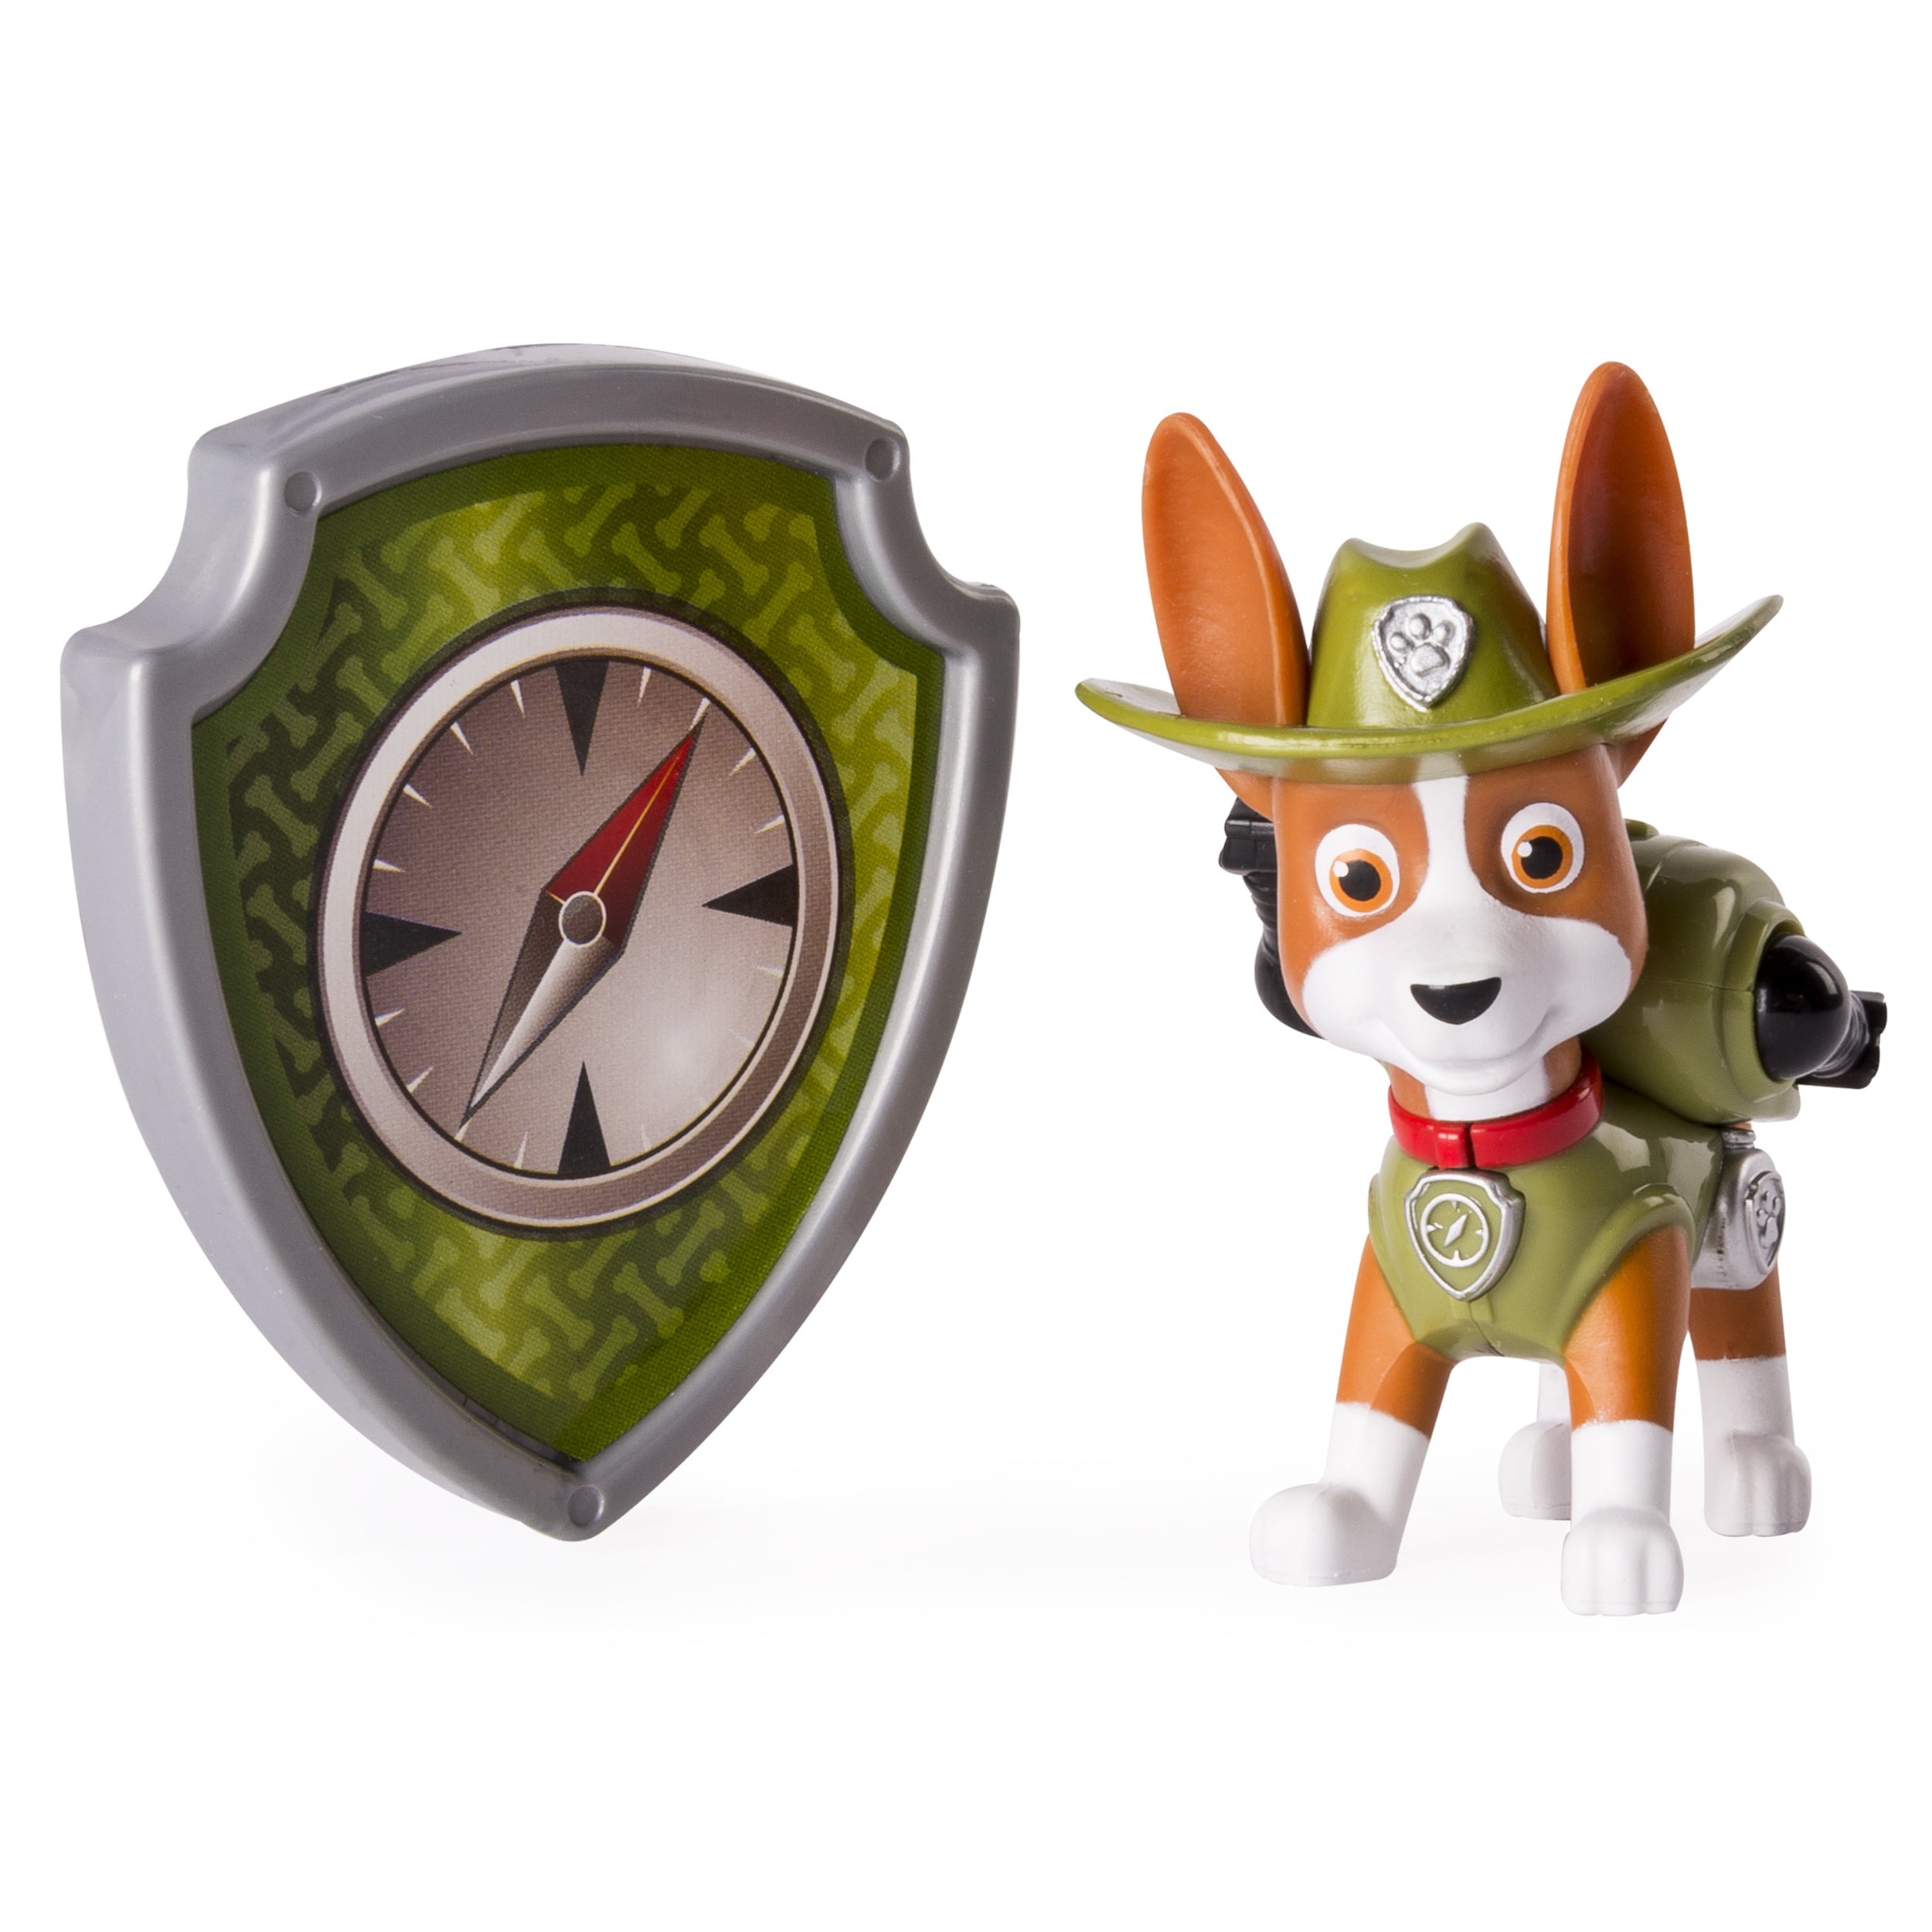 Paw Patrol Action Pack Pup and Badge Tracker